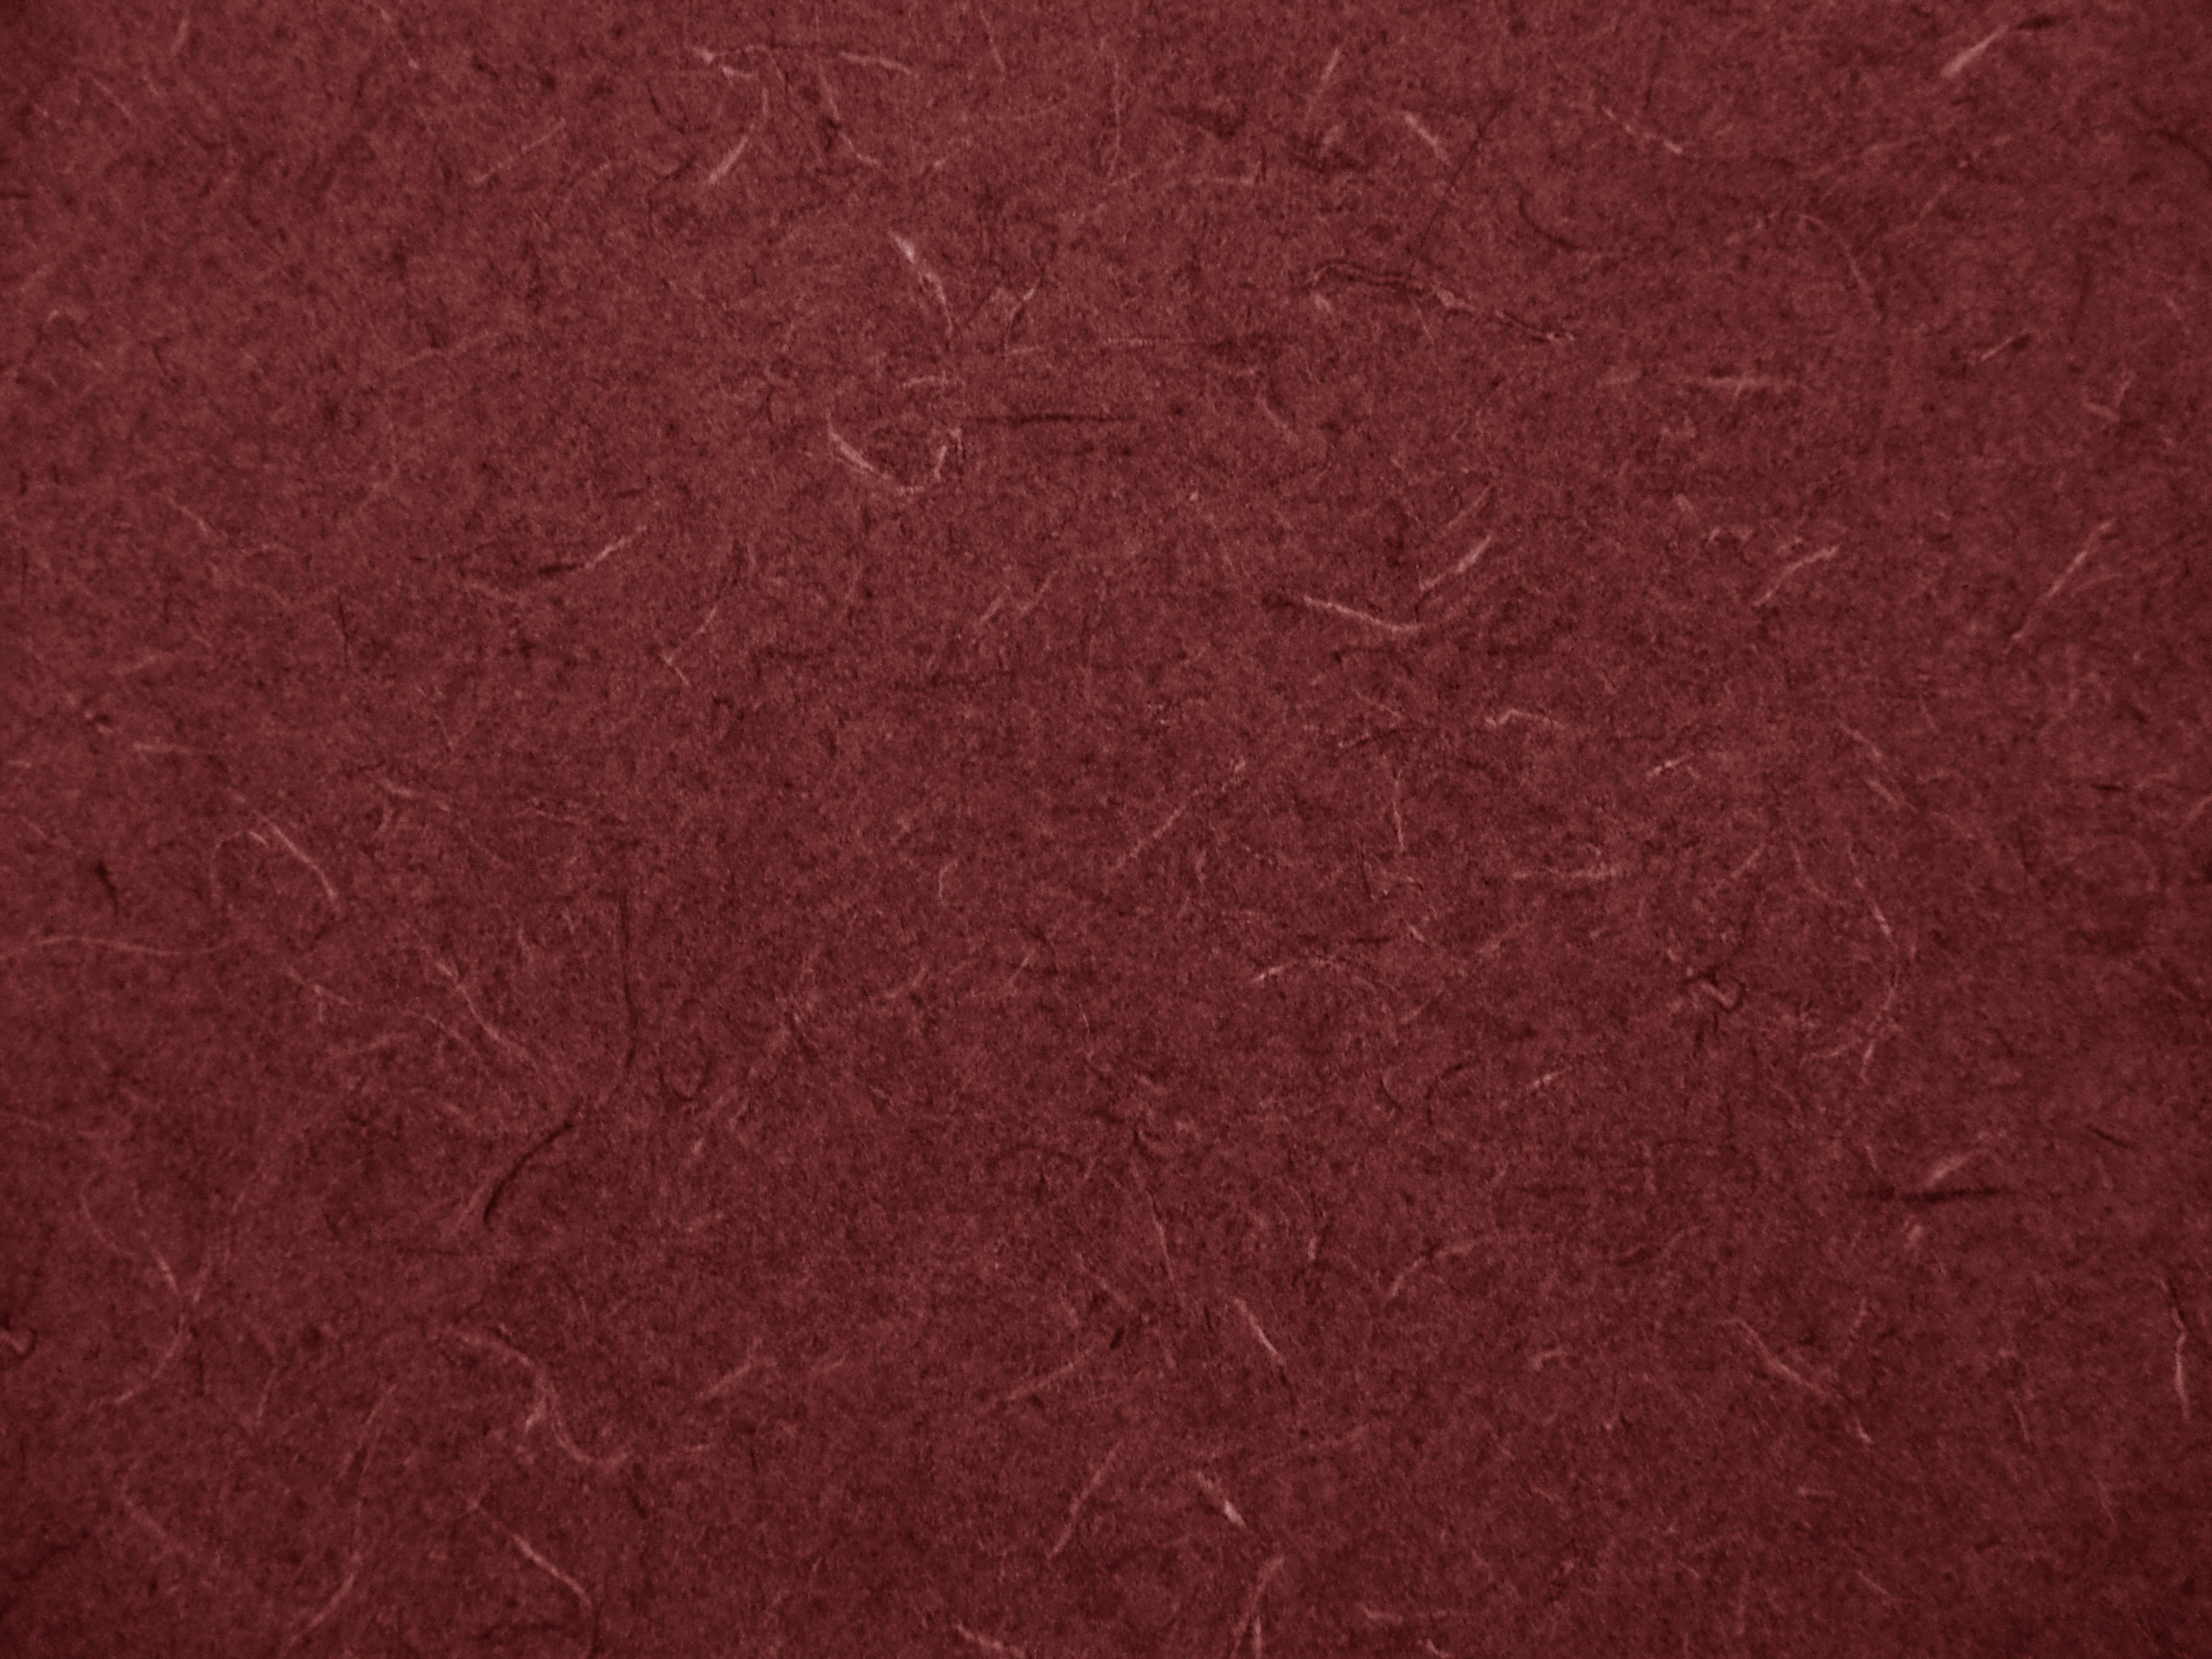 Maroon Abstract Pattern Laminate Countertop Texture Picture Free